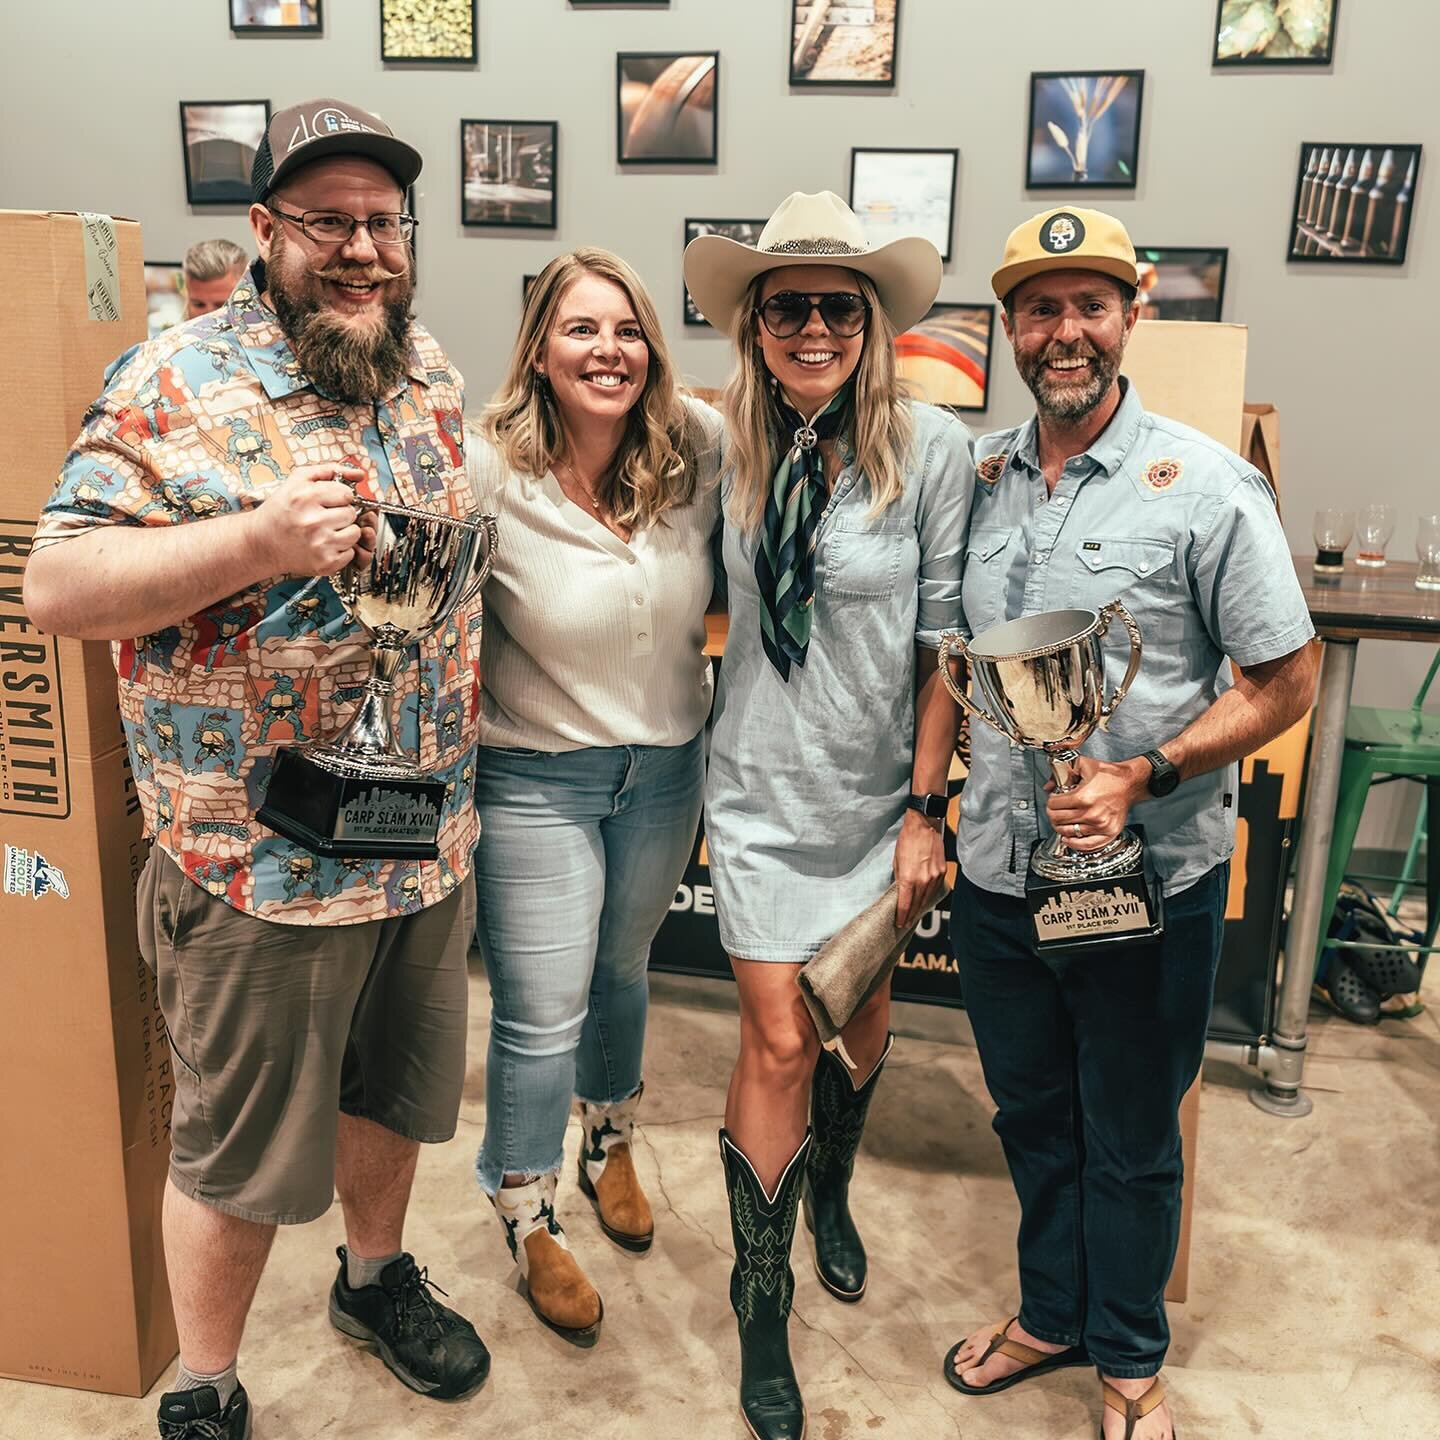 Bringing home the Fred Miller CarpSlam Cups 🤘 @millerrp @brewing_master @aecobun @maggieonthefly bringing home 1st place at #carpslam2023 🤘
#protecttheplatte 

Big thanks to all of our sponsors that make CarpSlam possible! 

@orvisflyfishing 
@Rare